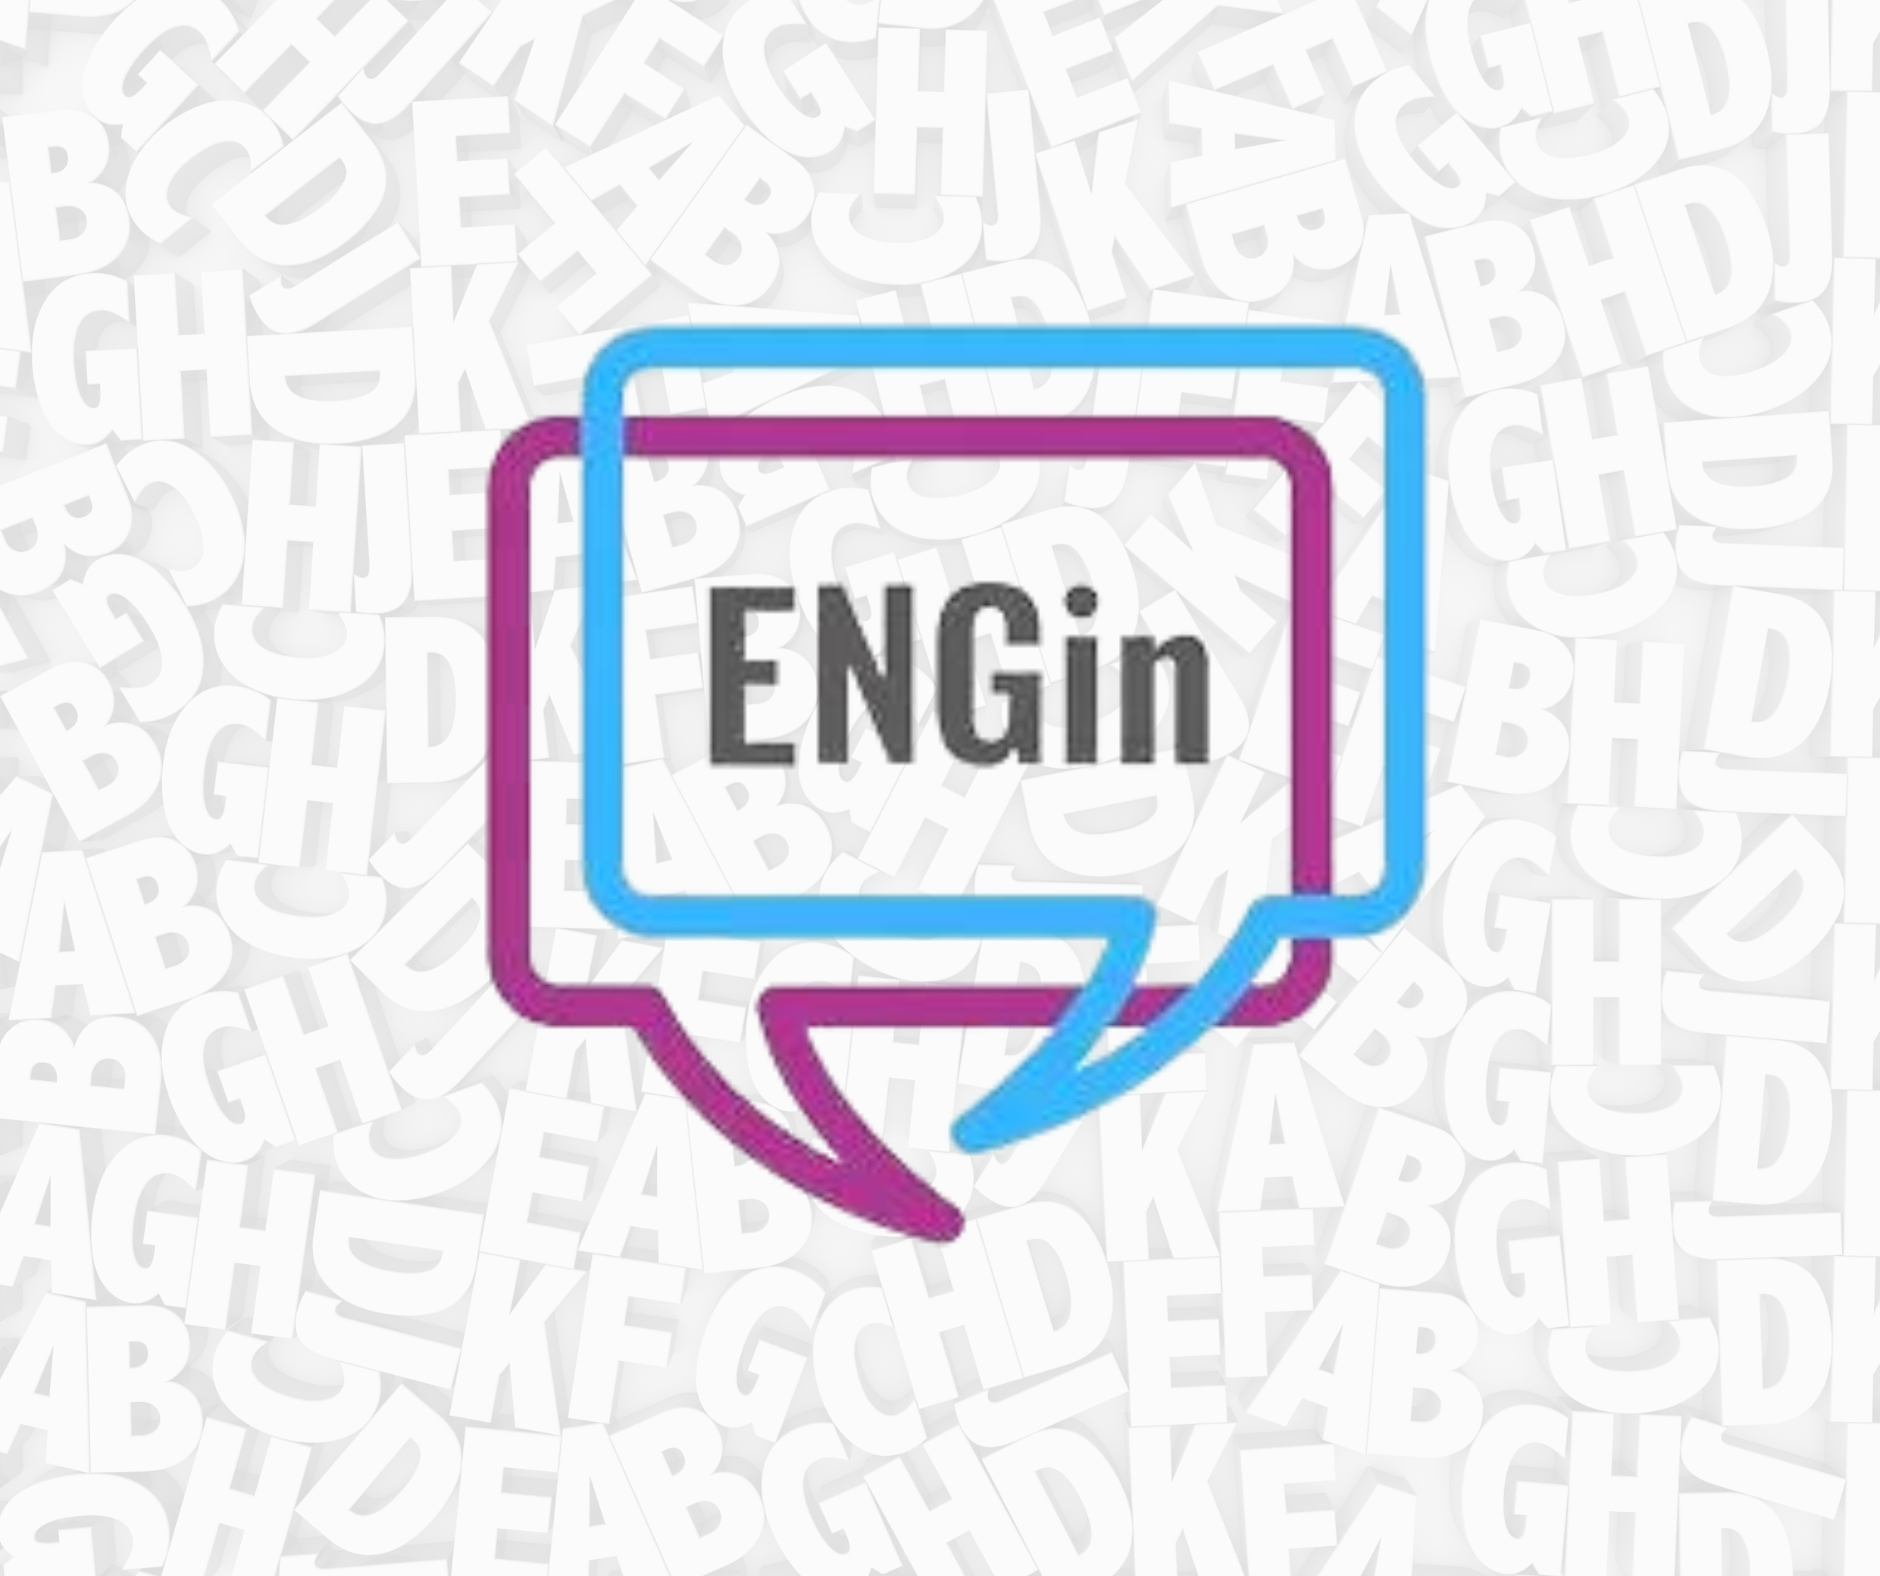 Partnership with ENGin